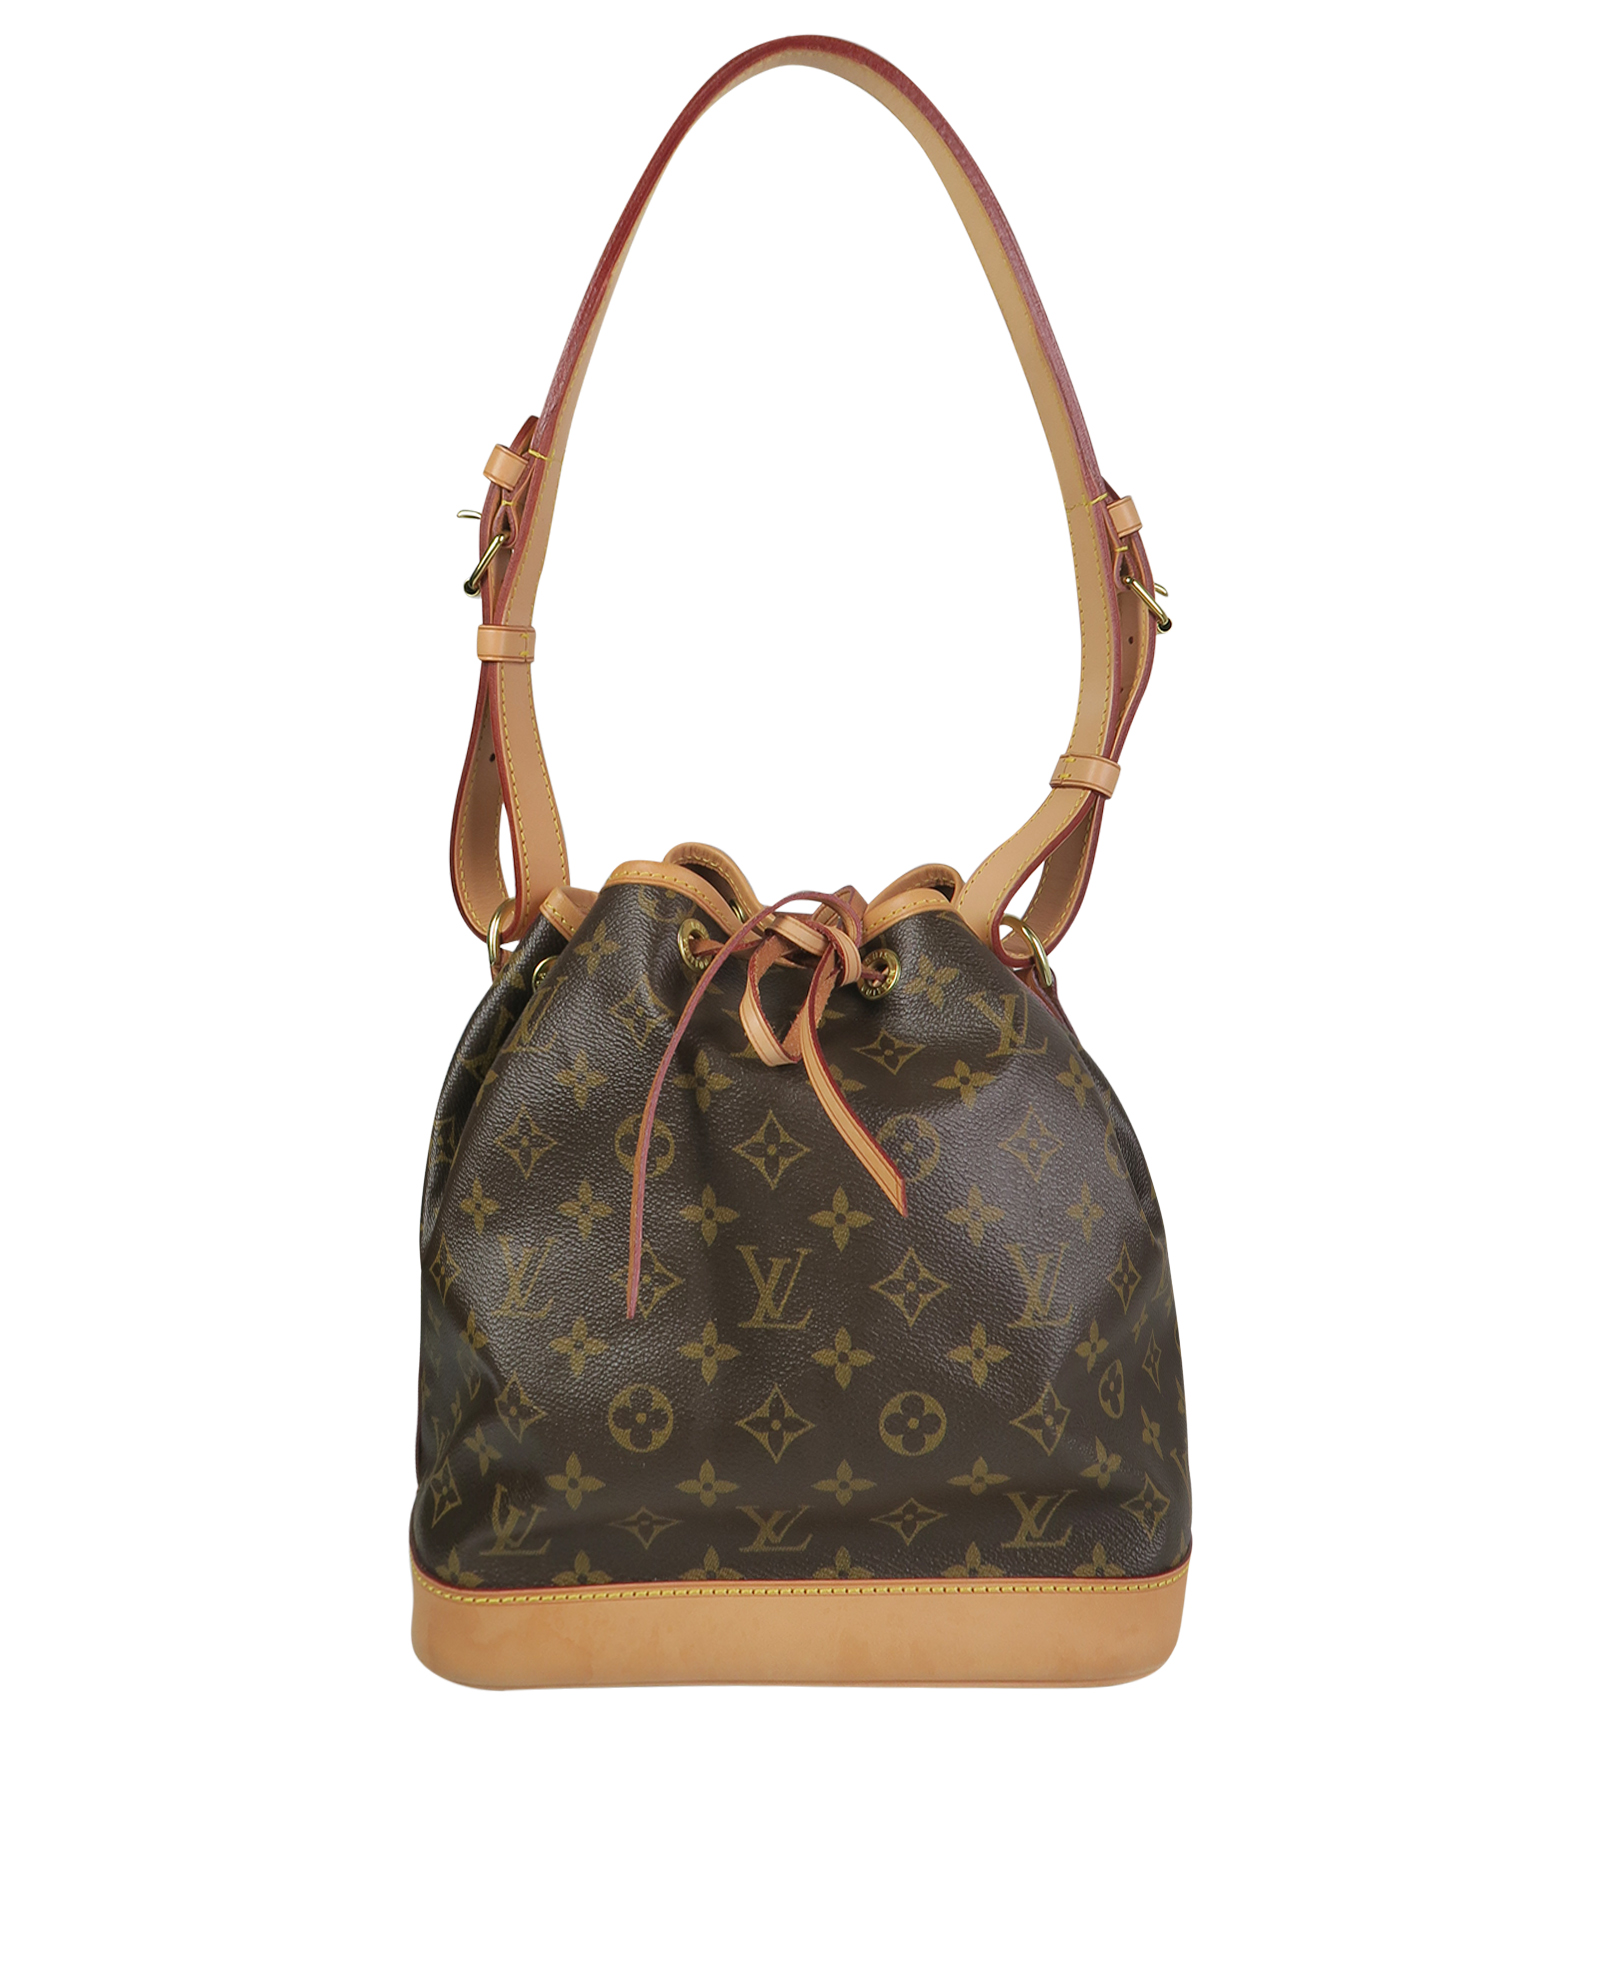 Shop for Louis Vuitton Monogram Canvas Leather Bucket GM Shoulder Bag -  Shipped from USA